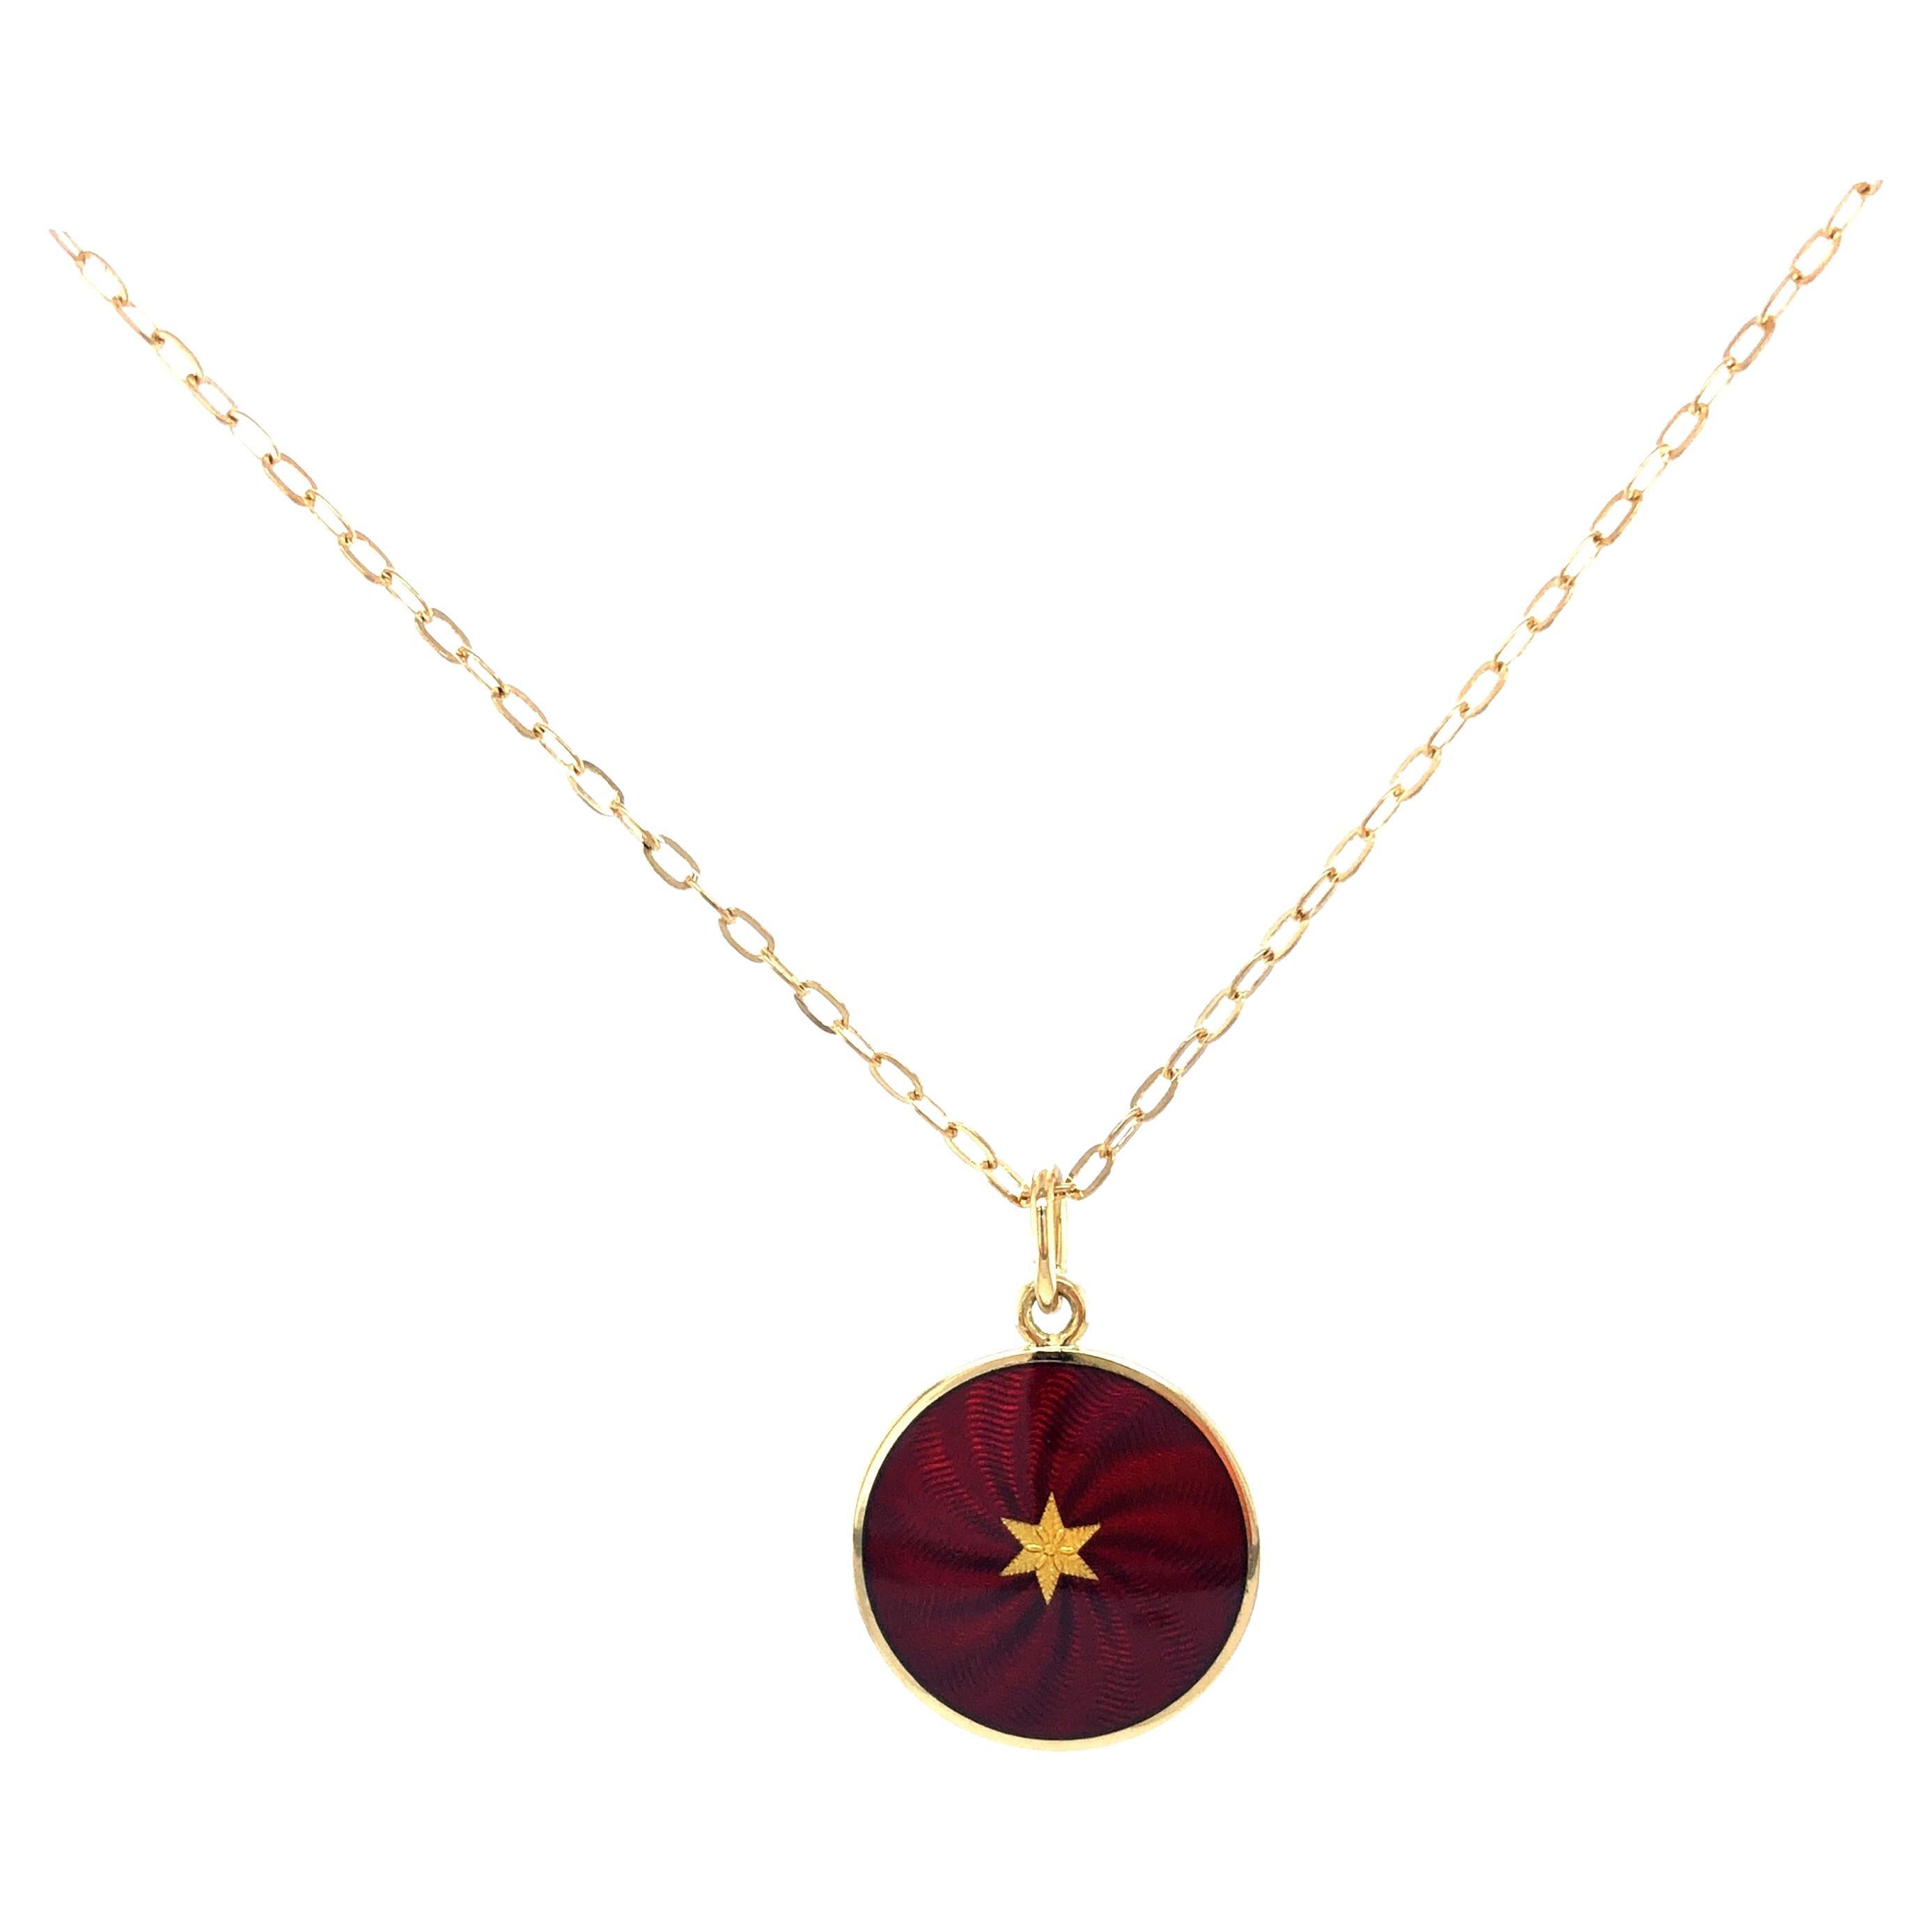 Round Disk Pendant, 18k Yellow Gold, Burgundy Red Guilloche Enamel Paillons